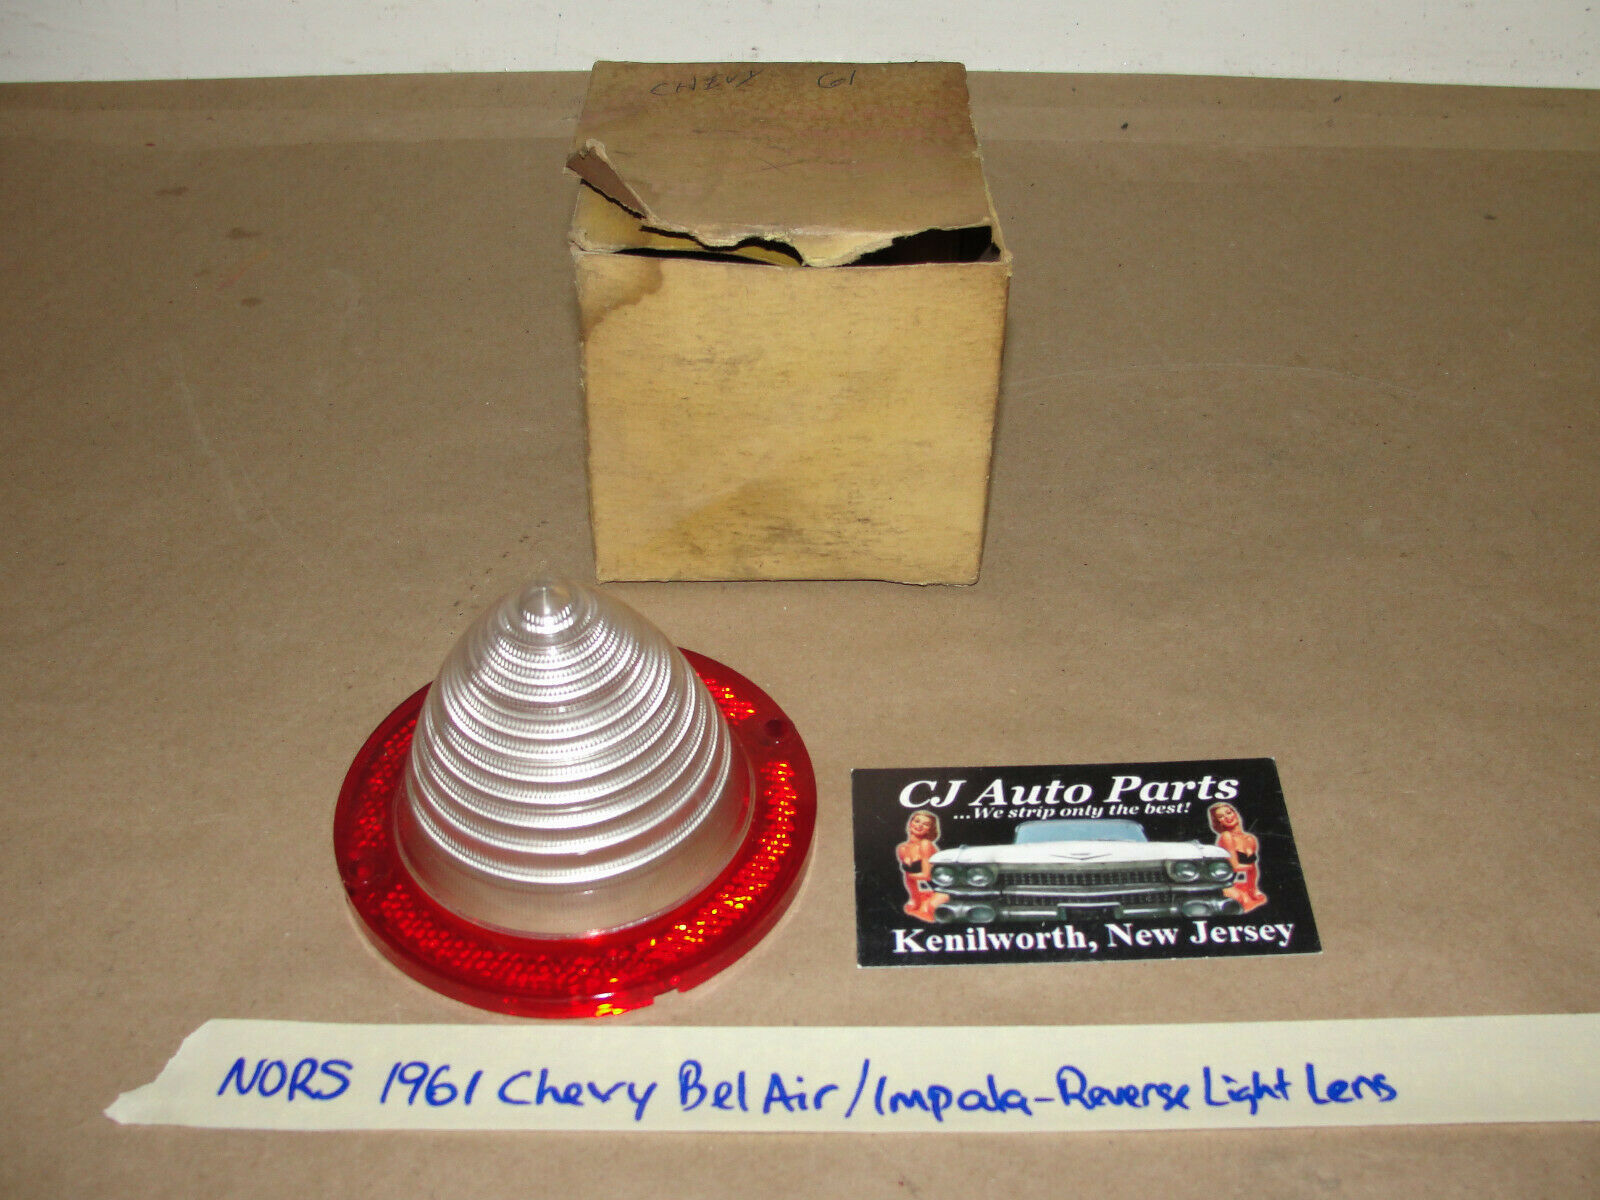 NOS/NORS 1961 CHEVY BEL AIR IMPALA BISCAYNE REVERSE BACK UP LIGHT LENS - $29.69